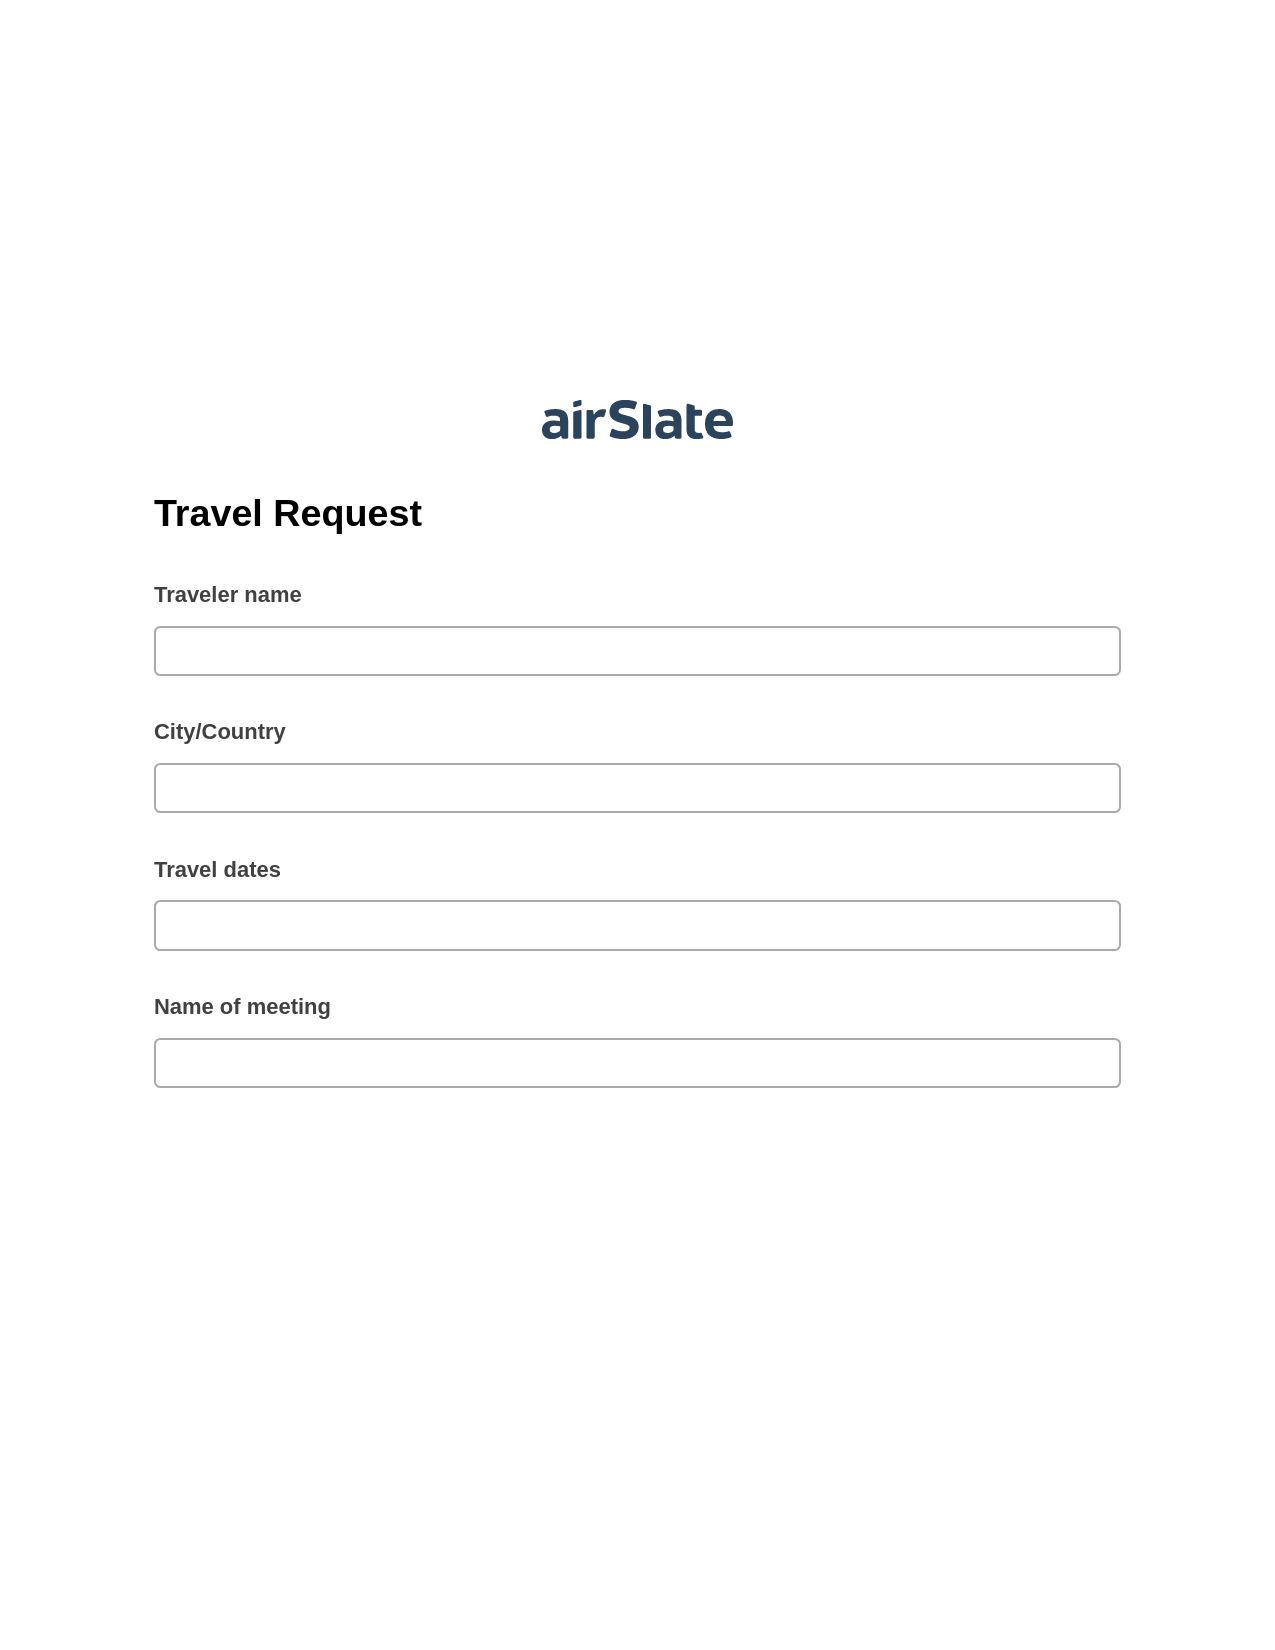 Travel Request Pre-fill from another Slate Bot, Webhook Bot, Email Notification Postfinish Bot